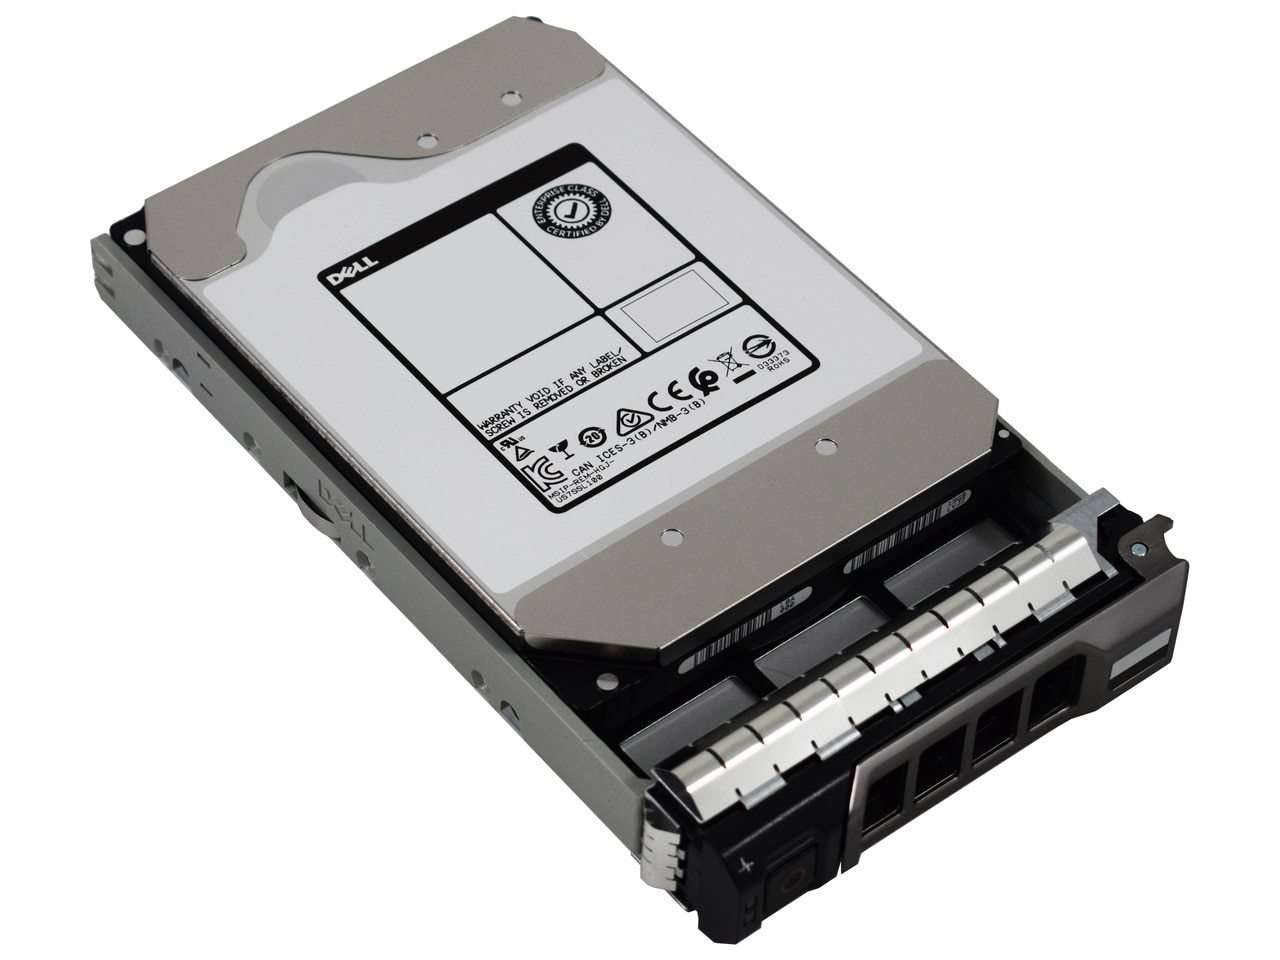 Dell G13 400-AHHI 6TB 7.2K RPM SATA 6Gb/s 512e 3.5" Manufacturer Recertified HDD